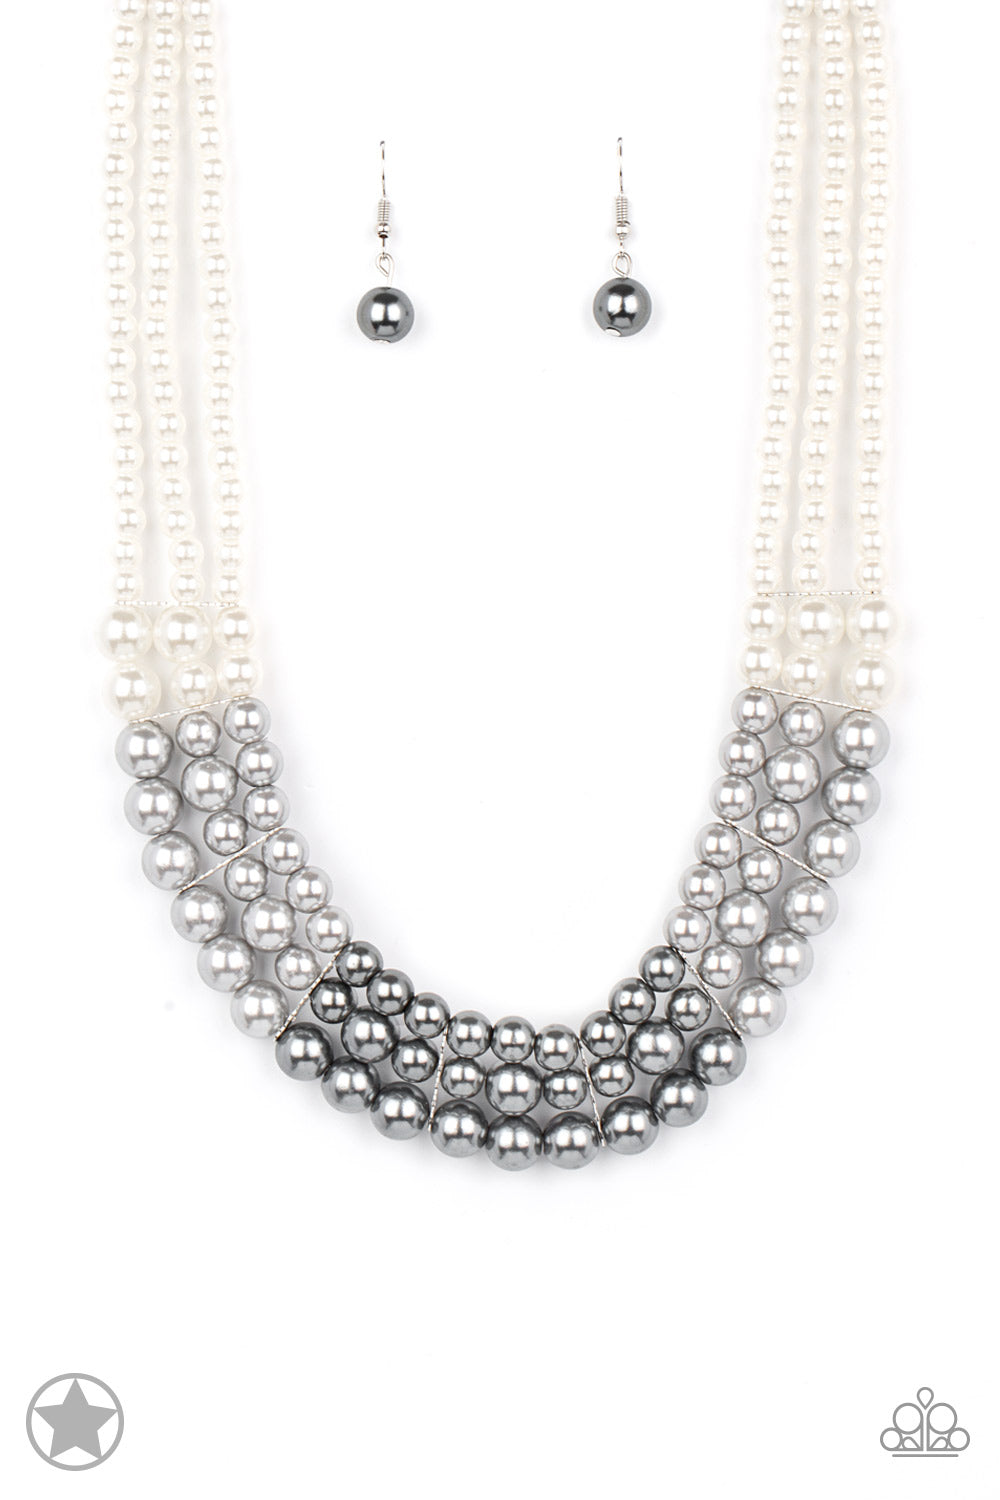 Paparazzi Accessories - Lady In Waiting White Pearl Necklace Blockbuster